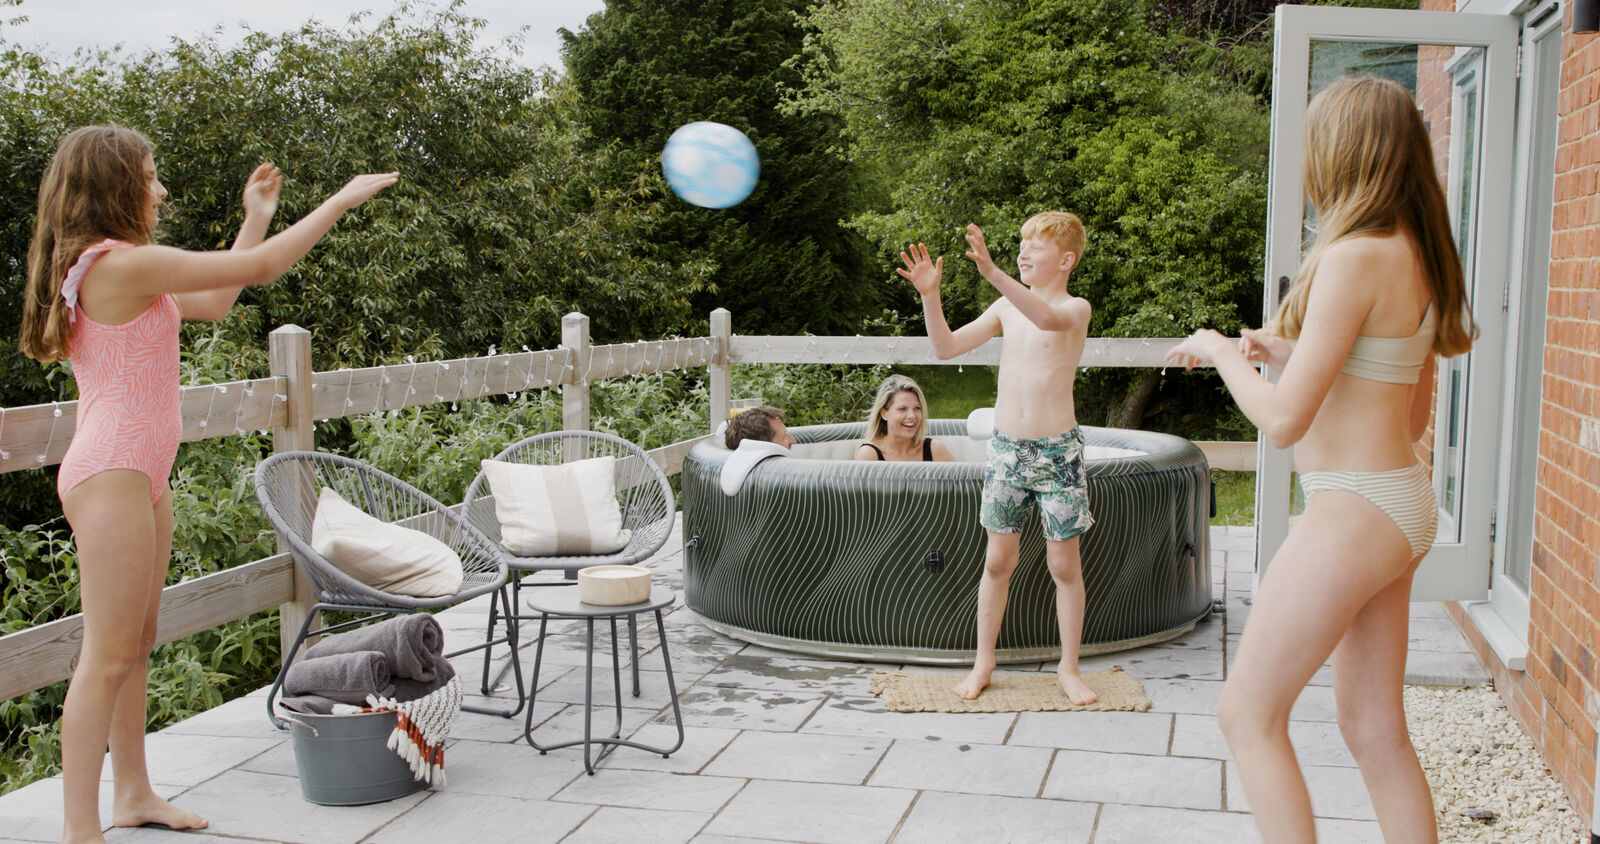 Melt Away Stress: MSPA METEOR 6-Person Inflatable Hot Tub